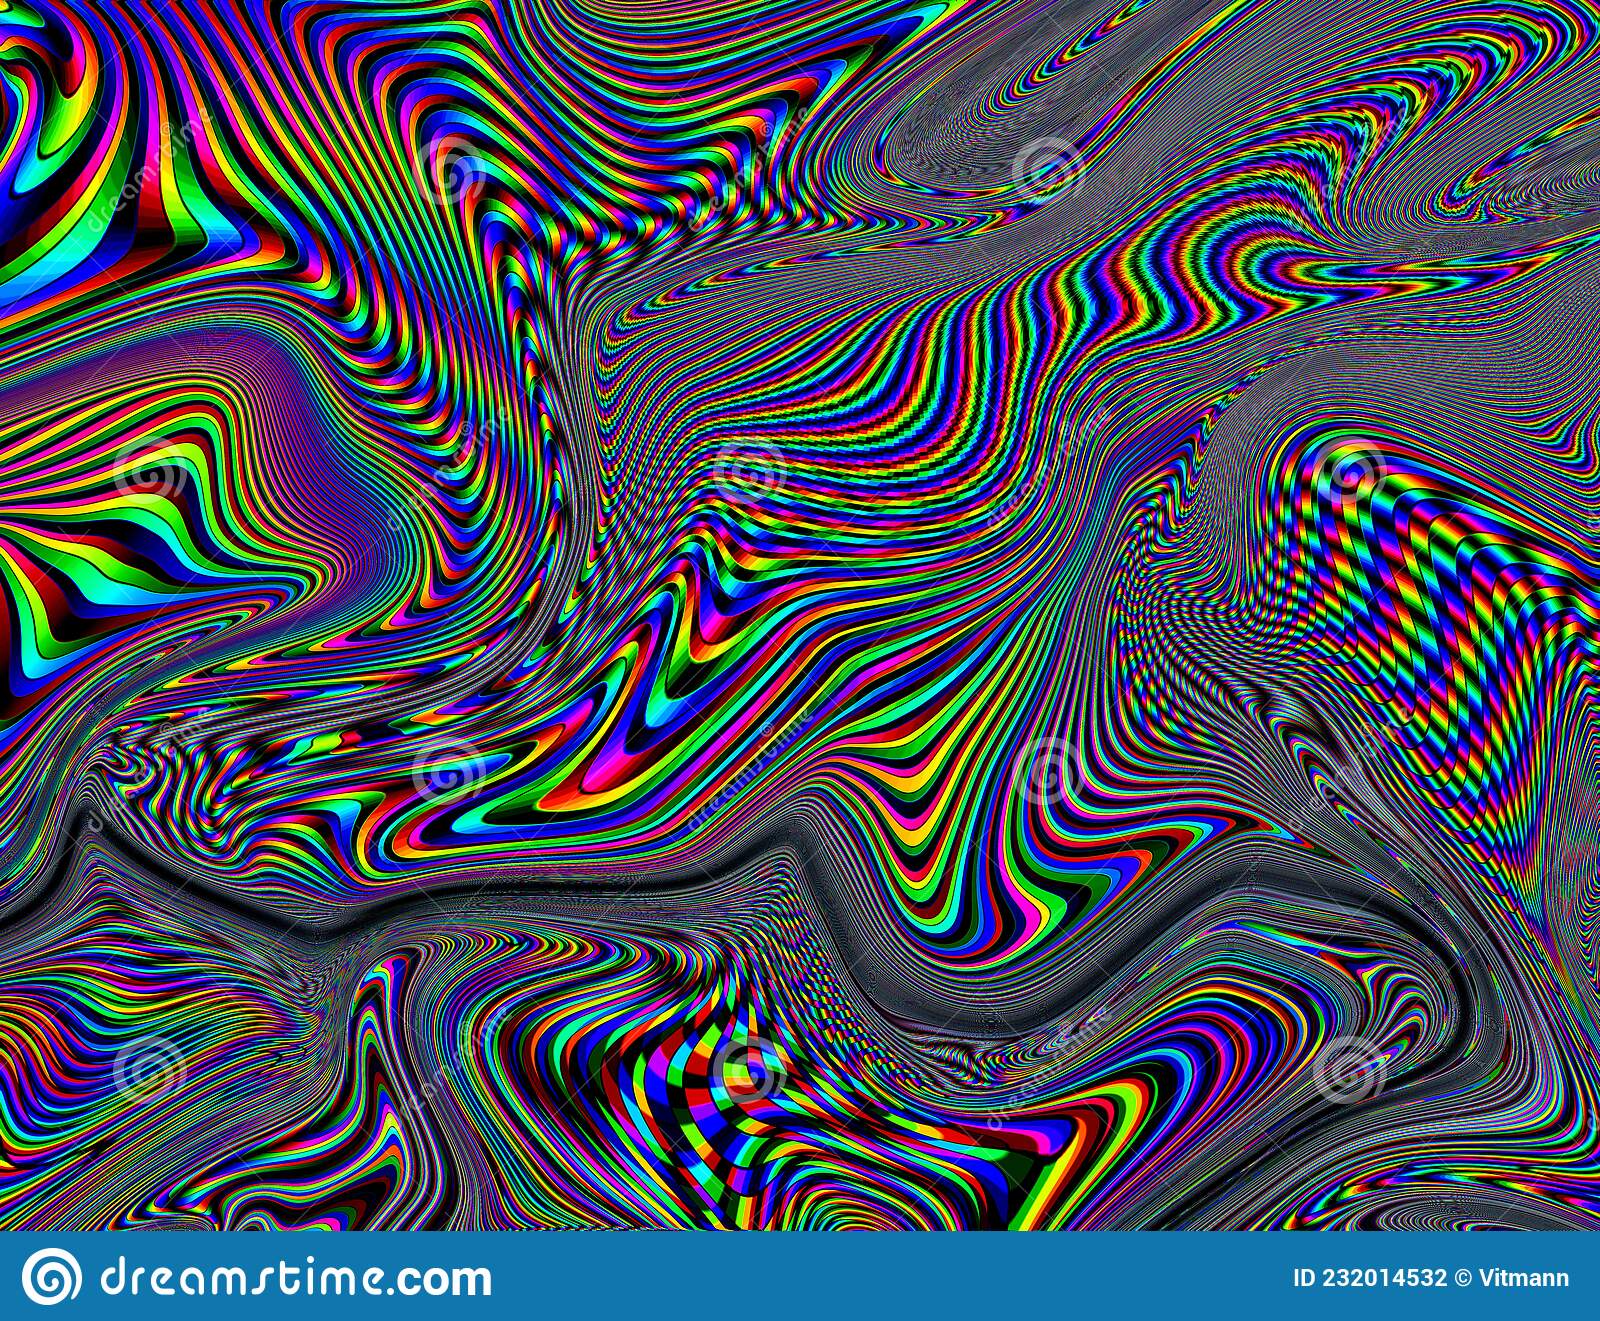 Trippy psychedelic rainbow background glitch lsd colorful wallpaper s abstract hypnotic illusion stock illustration